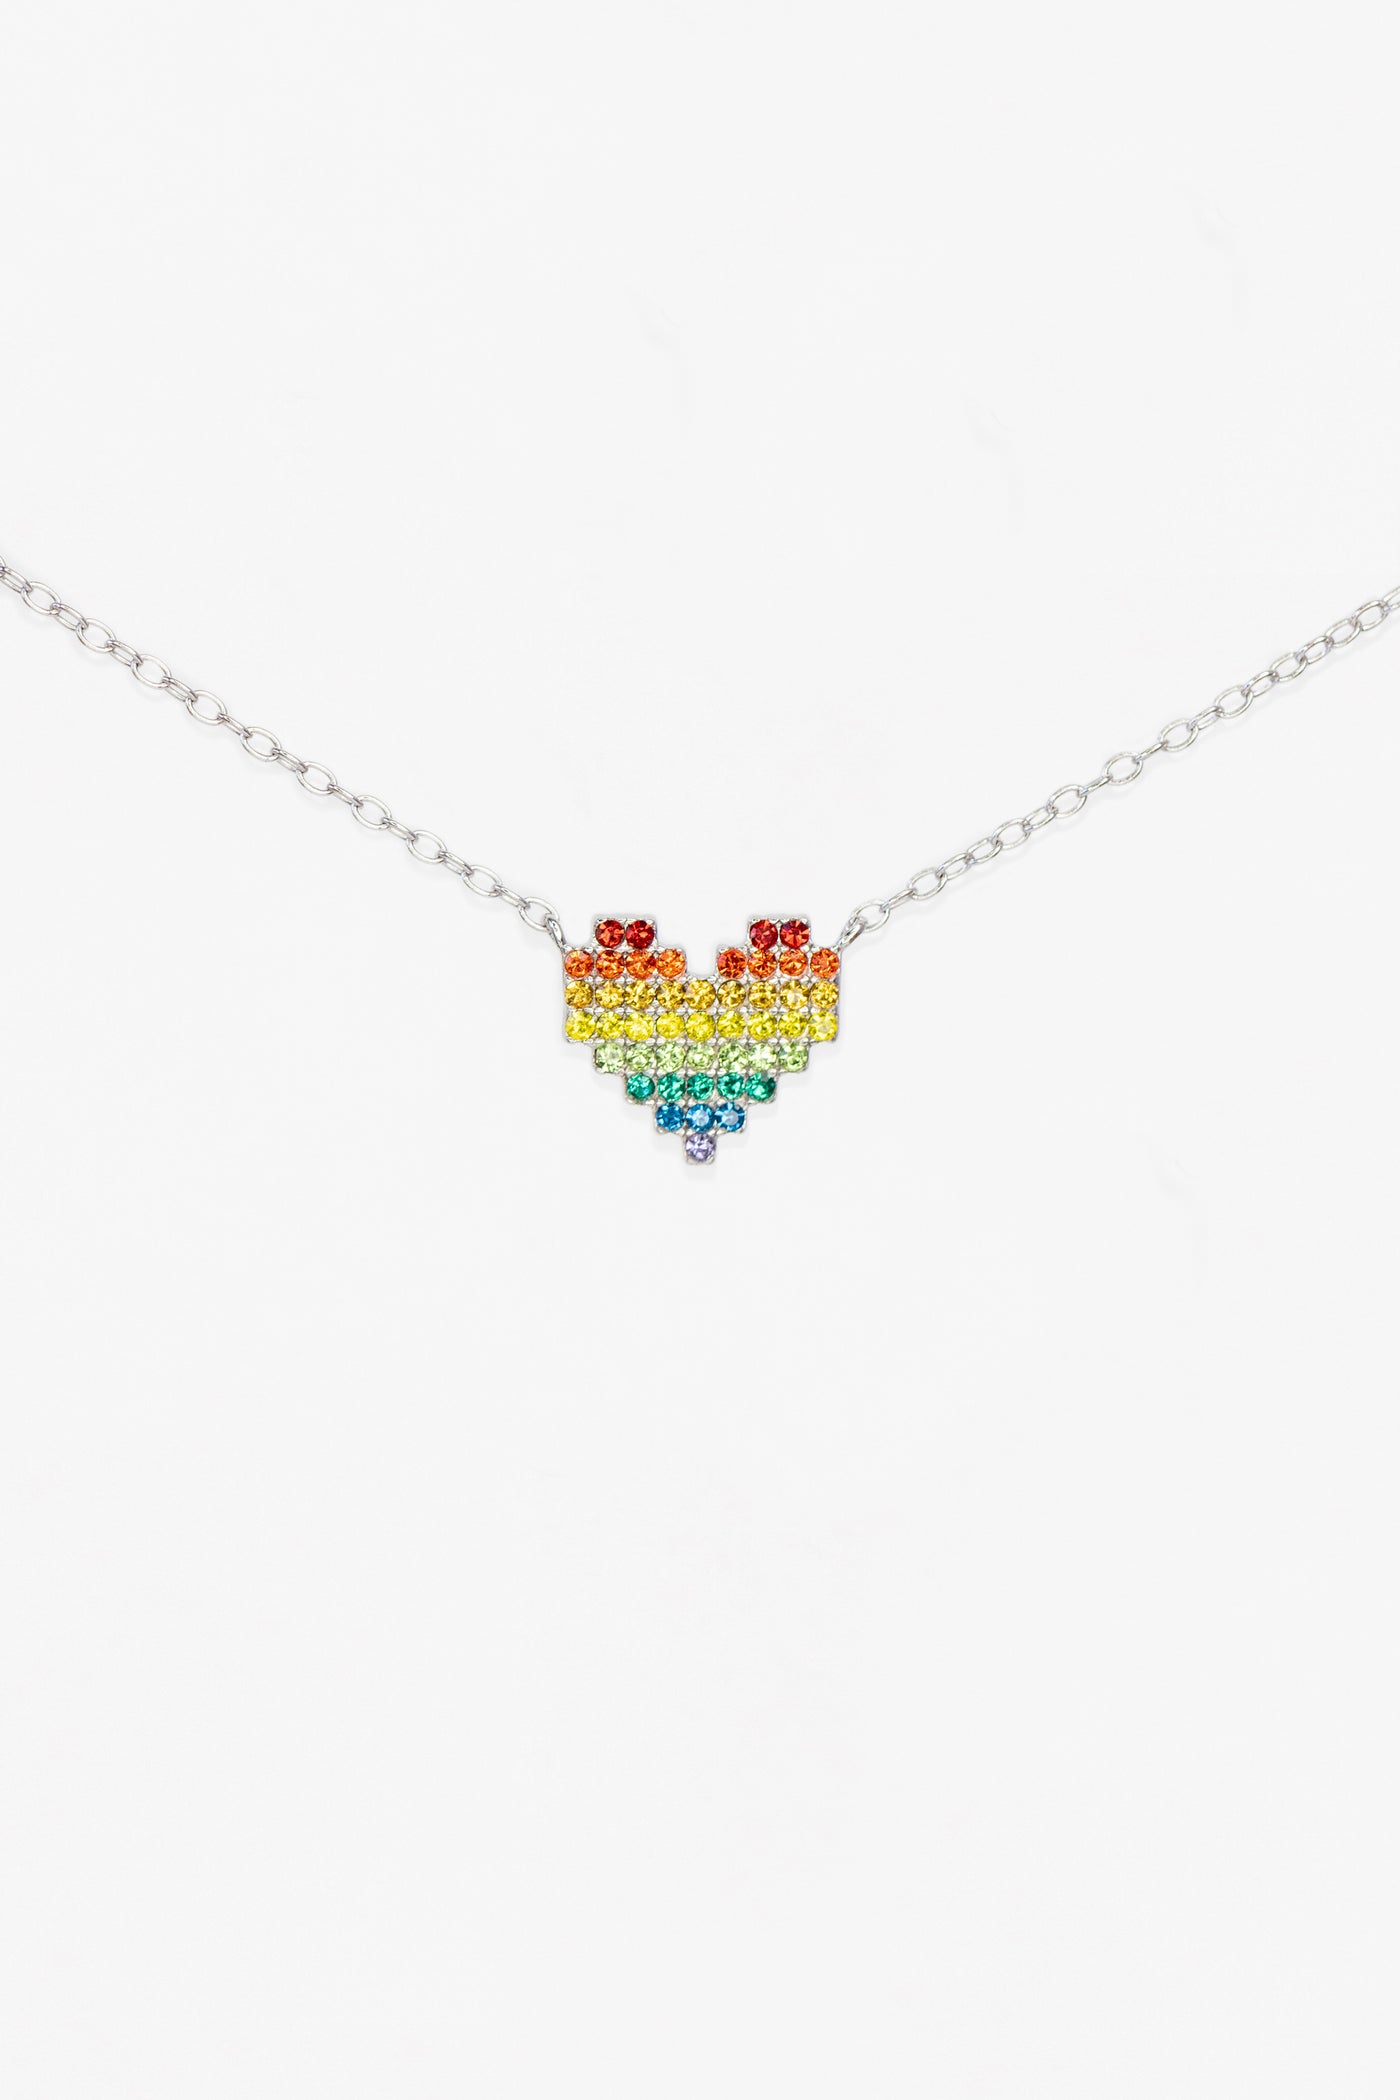 Rainbow Heart Crystal Sterling Silver Necklace